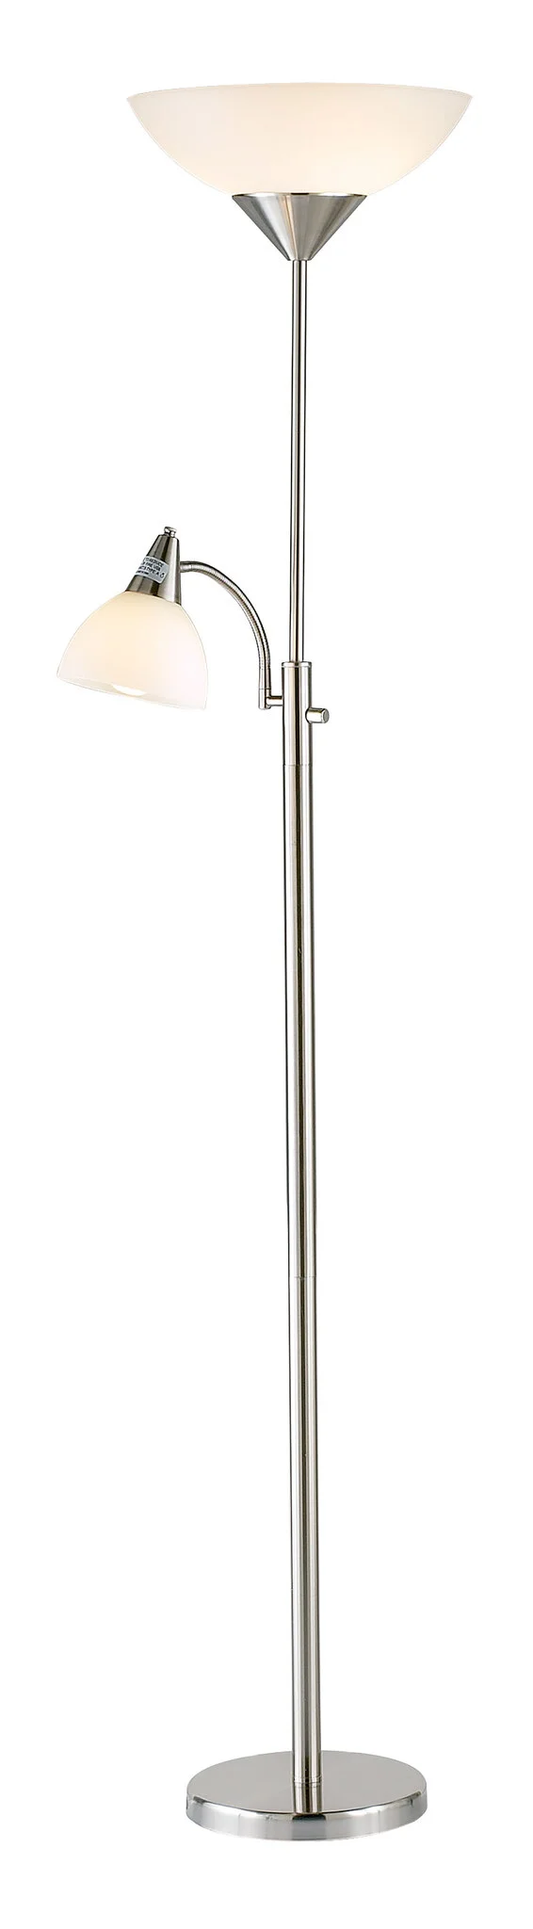 71" Two Light Torchiere Floor Lamp With White Acrylic Bowl Shades